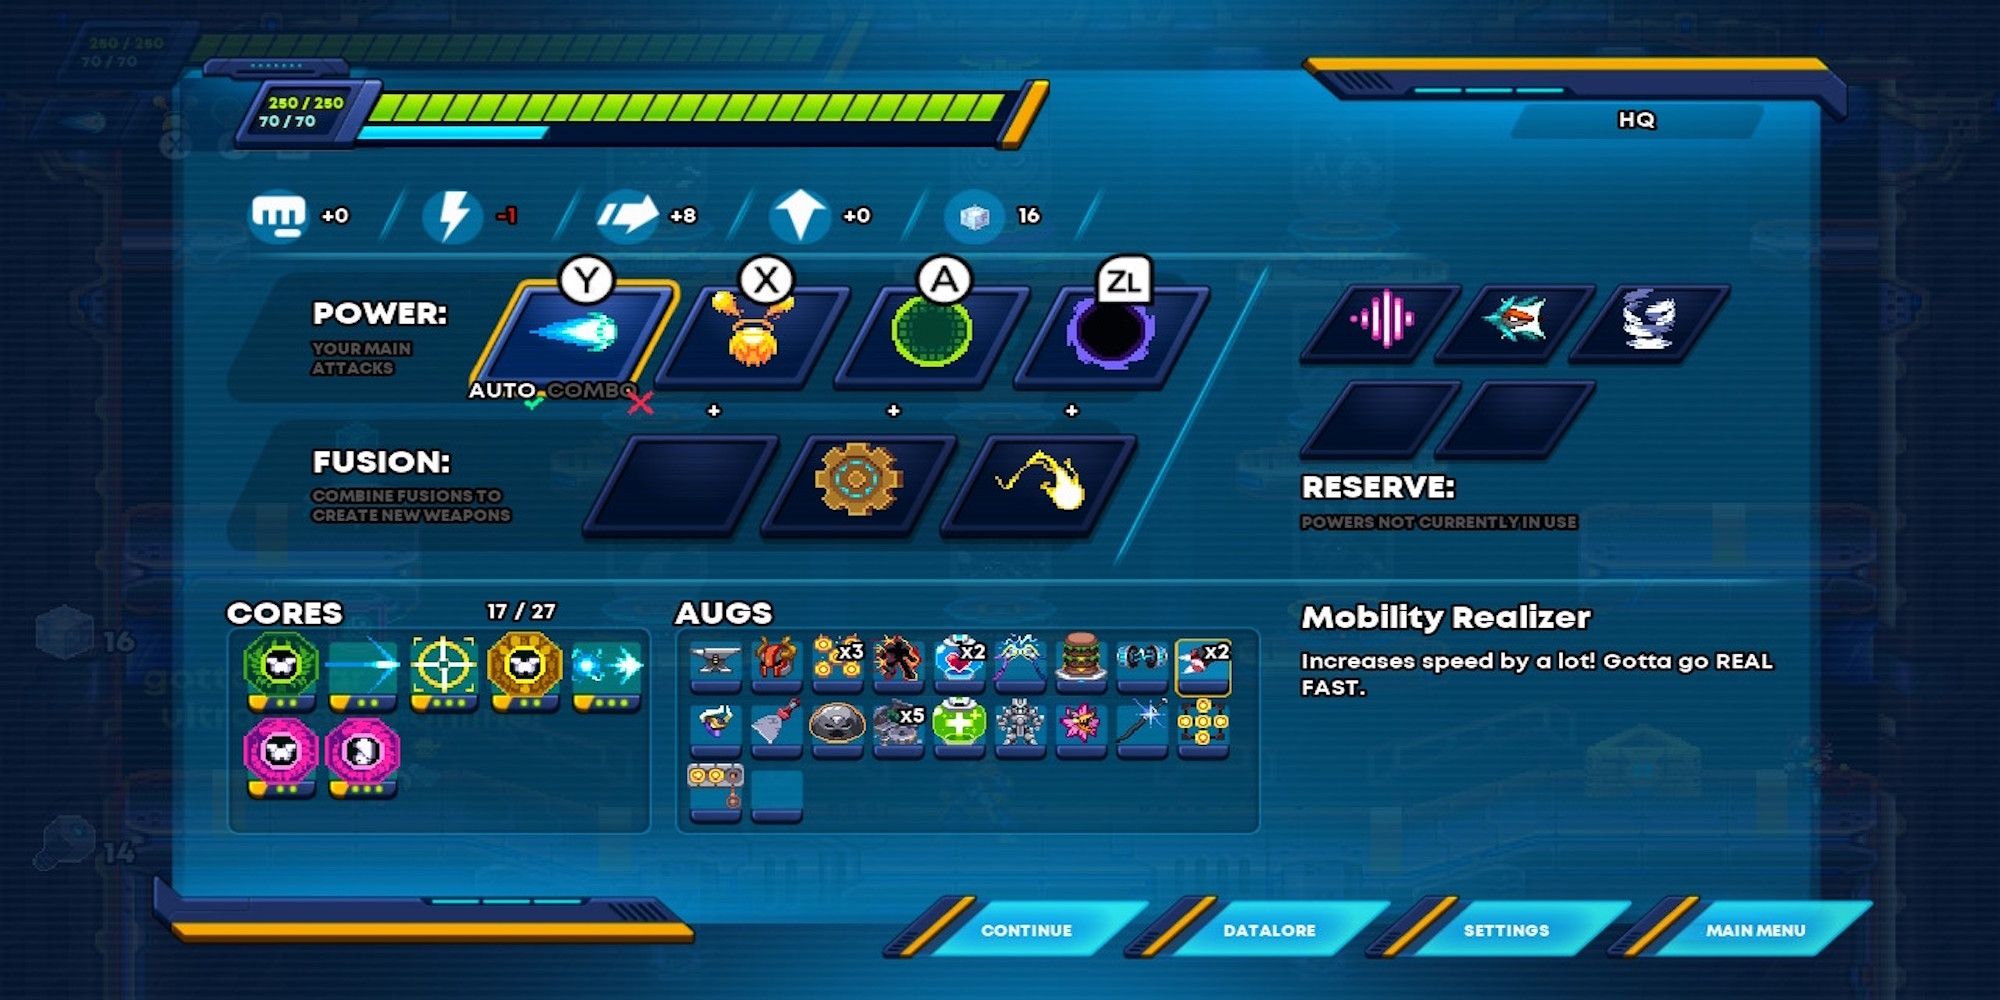 Mobility Realizer Augment in 30XX